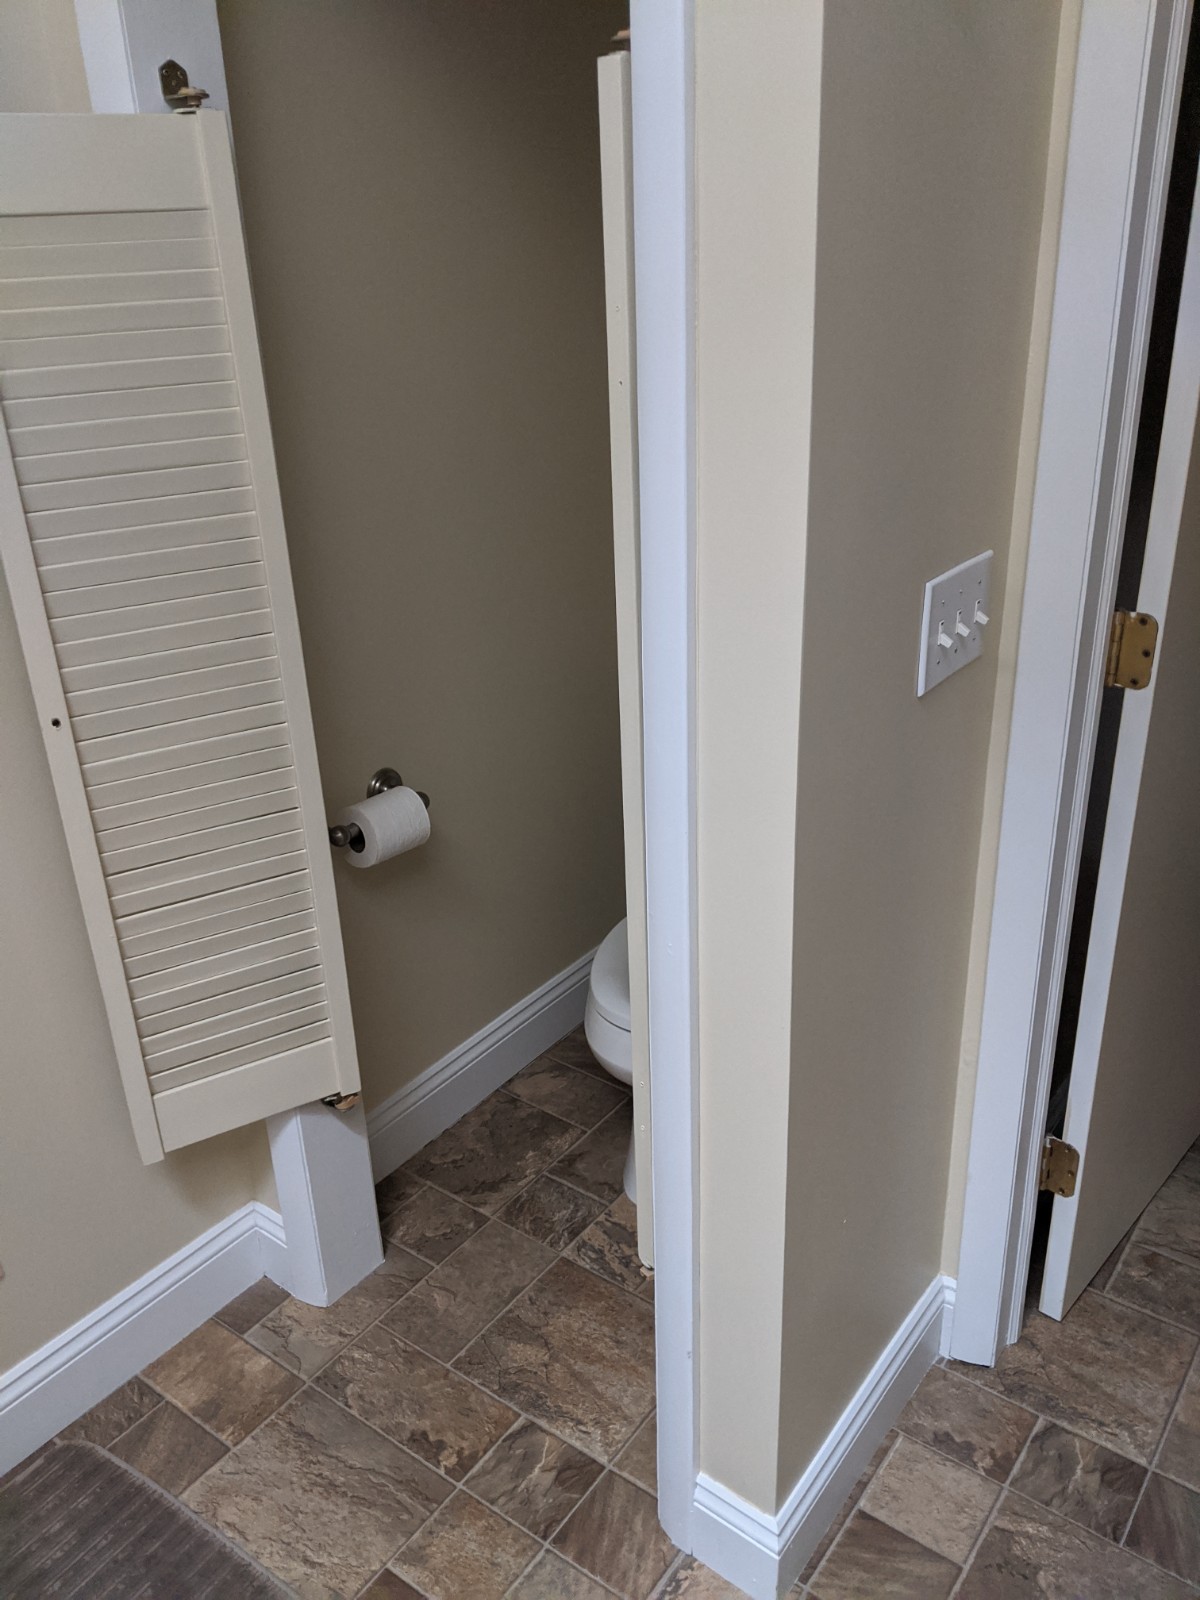 This pictures shows the outdated door on the water closet, as well as the brown 6 x 6 mixed tiles on the linoleum floor.